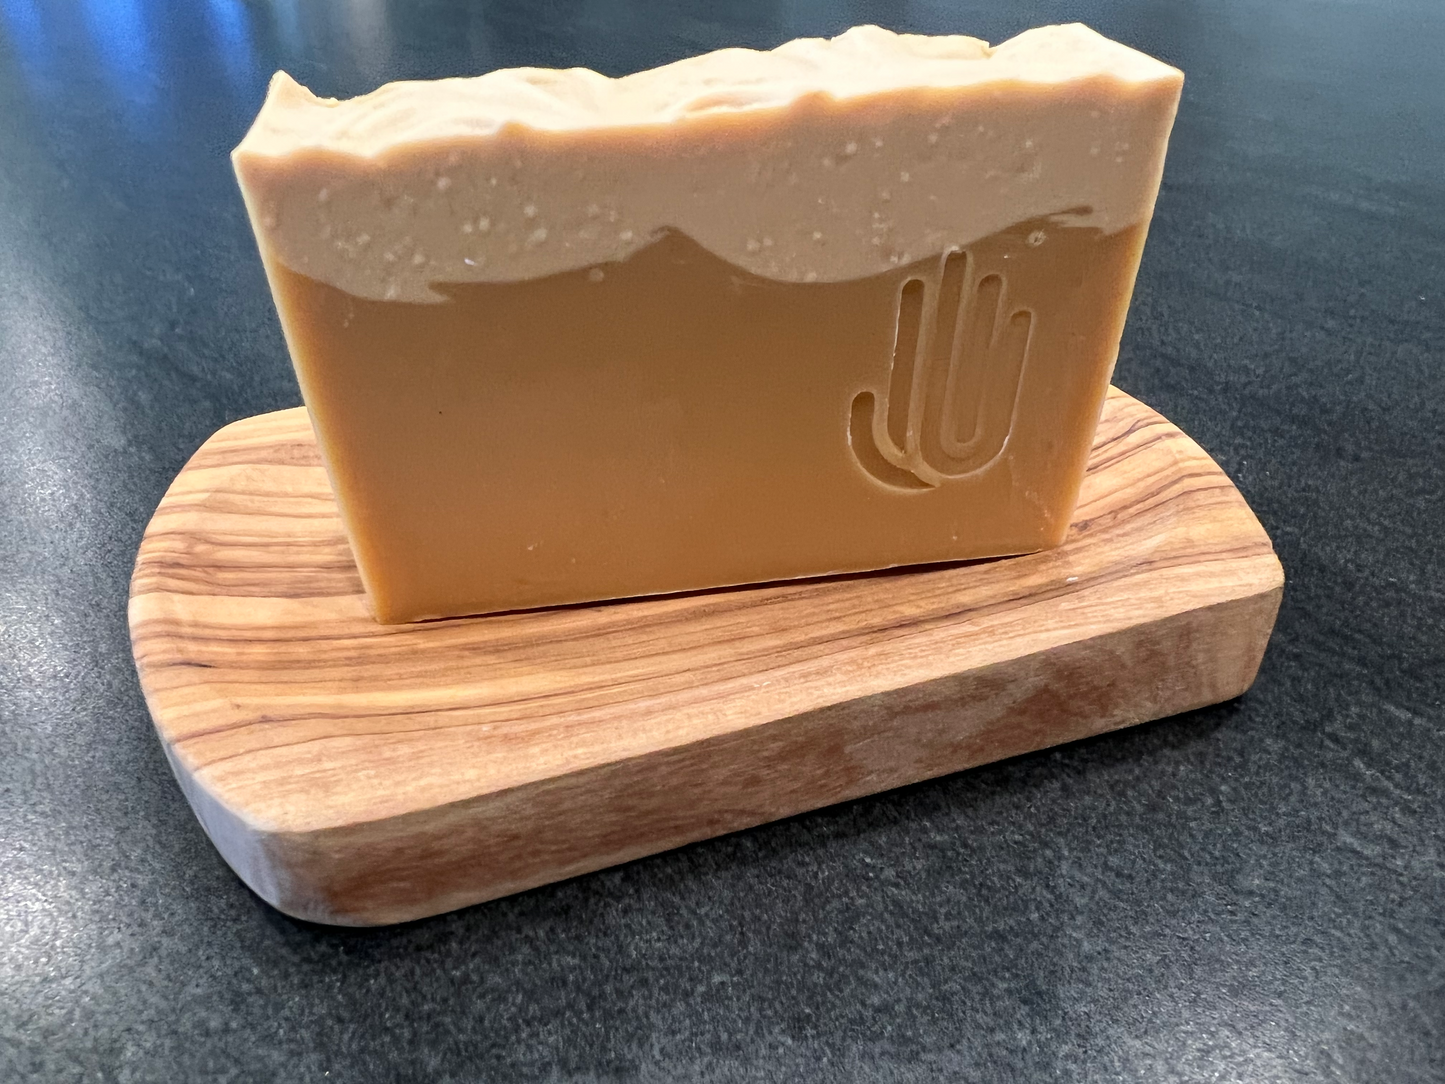 India Pale Ale Beer Soap